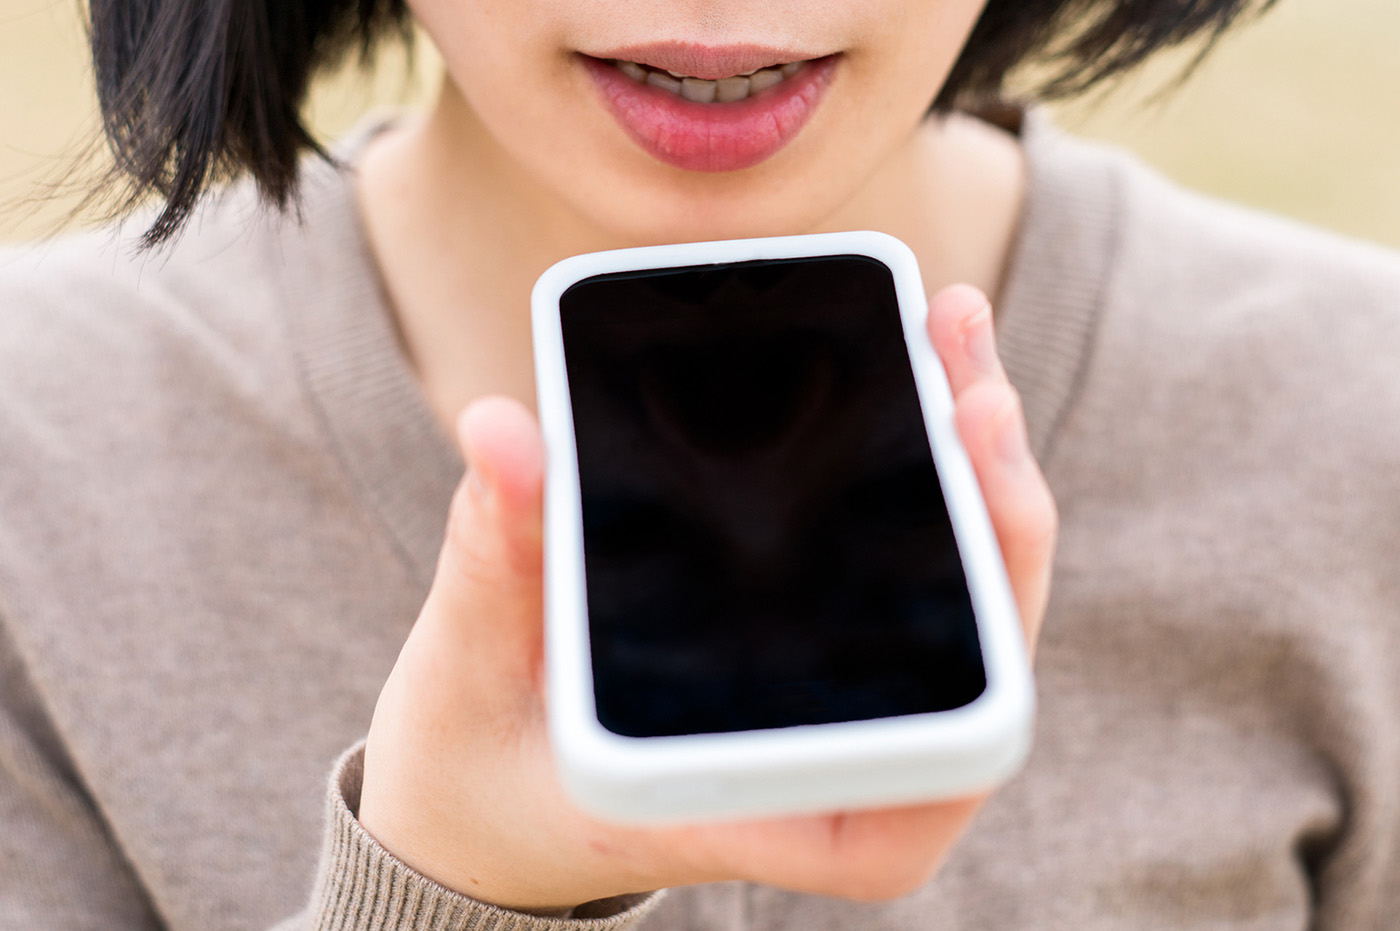 Mobile Voice Usage Trends in 2019